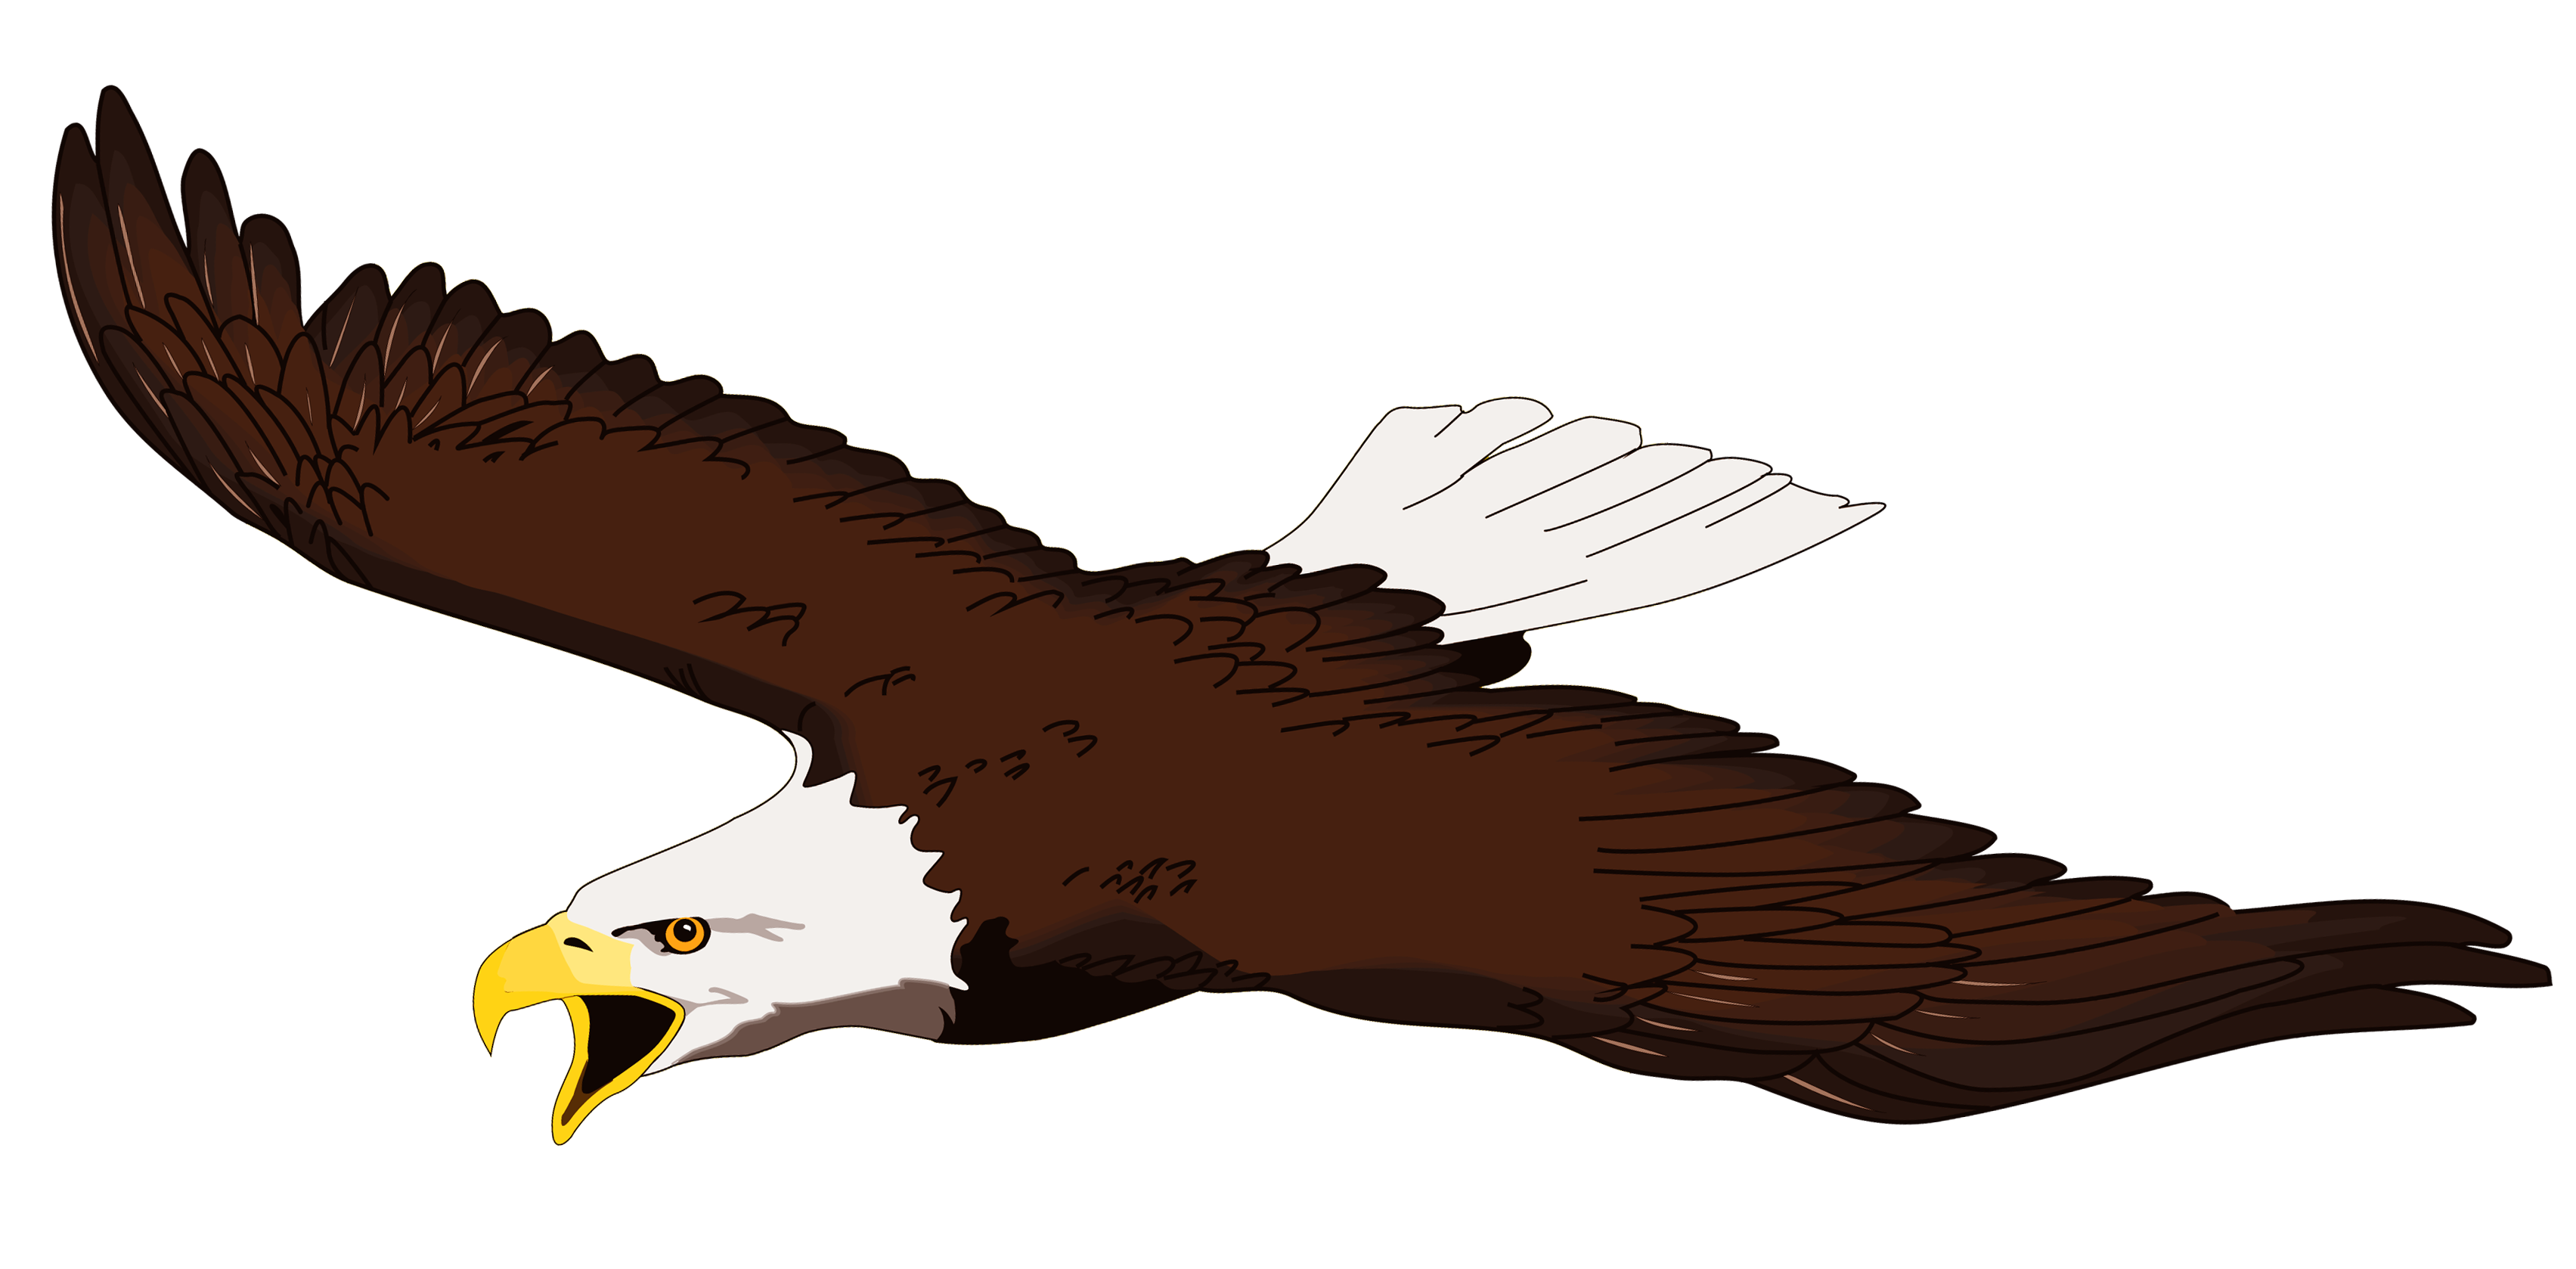 Eagles Clipart | Free Download Clip Art | Free Clip Art | on ...